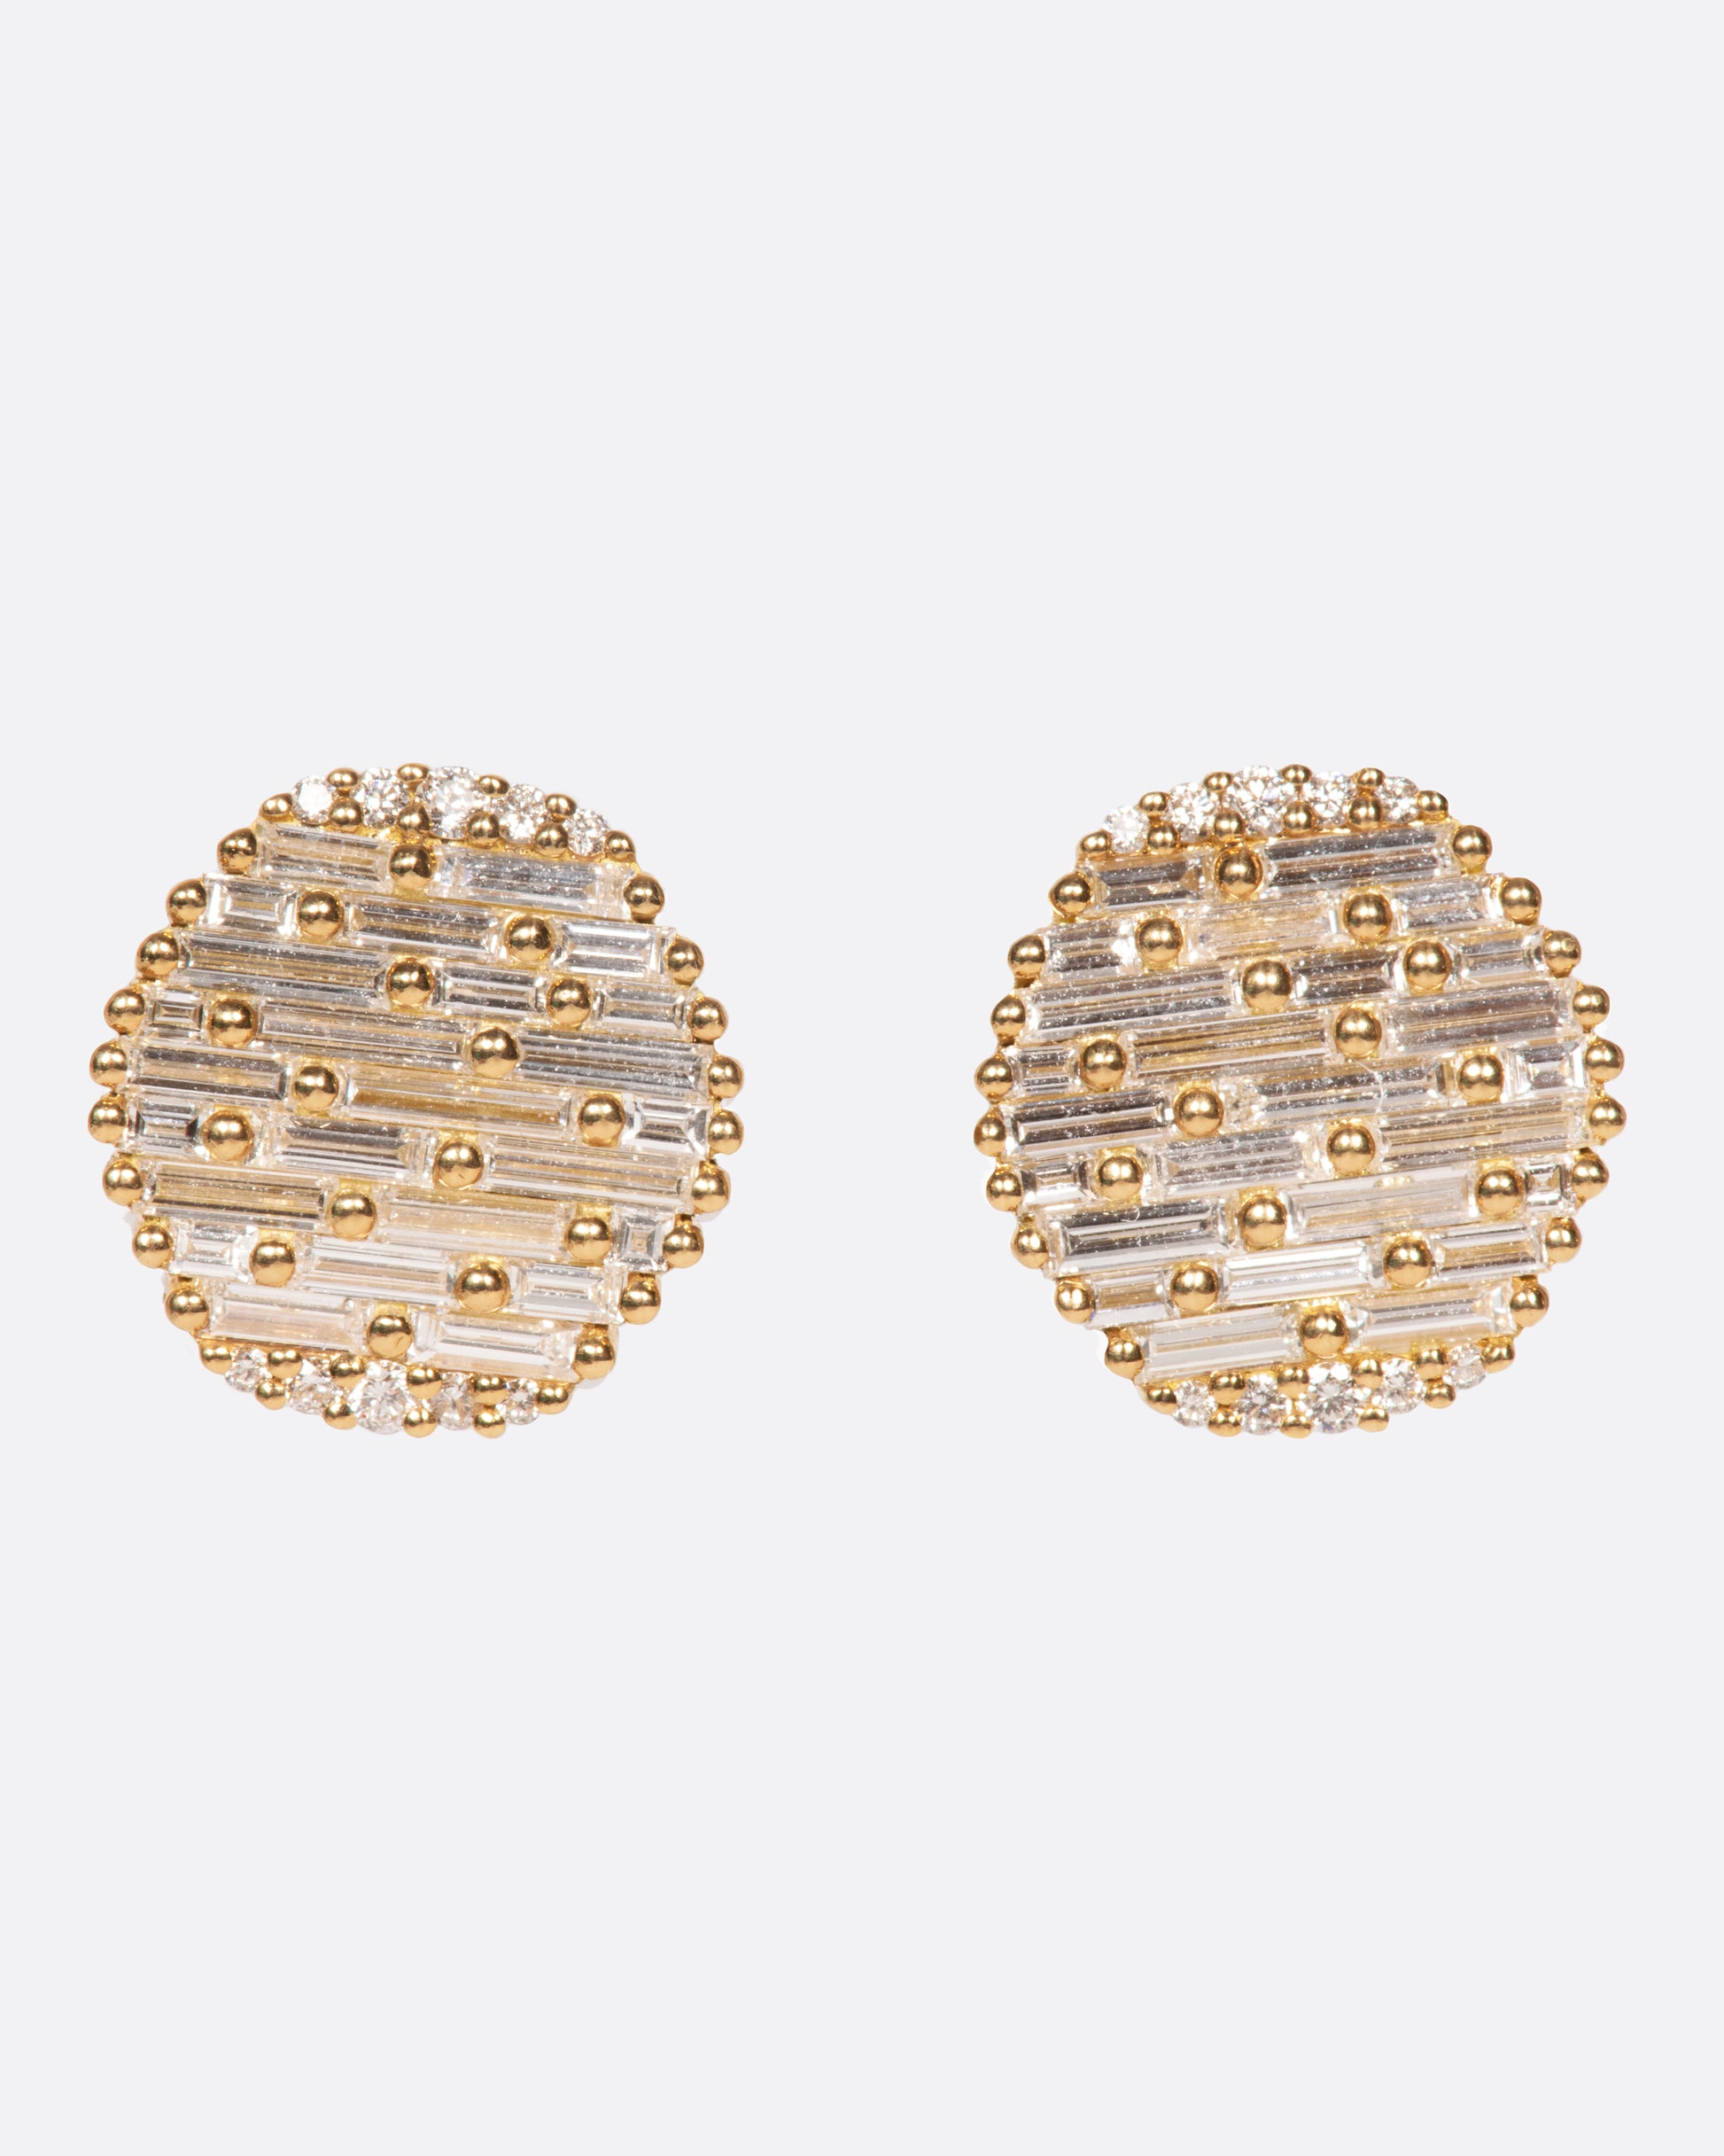 A pair of round, slightly concave stud earrings covered in baguette diamonds.